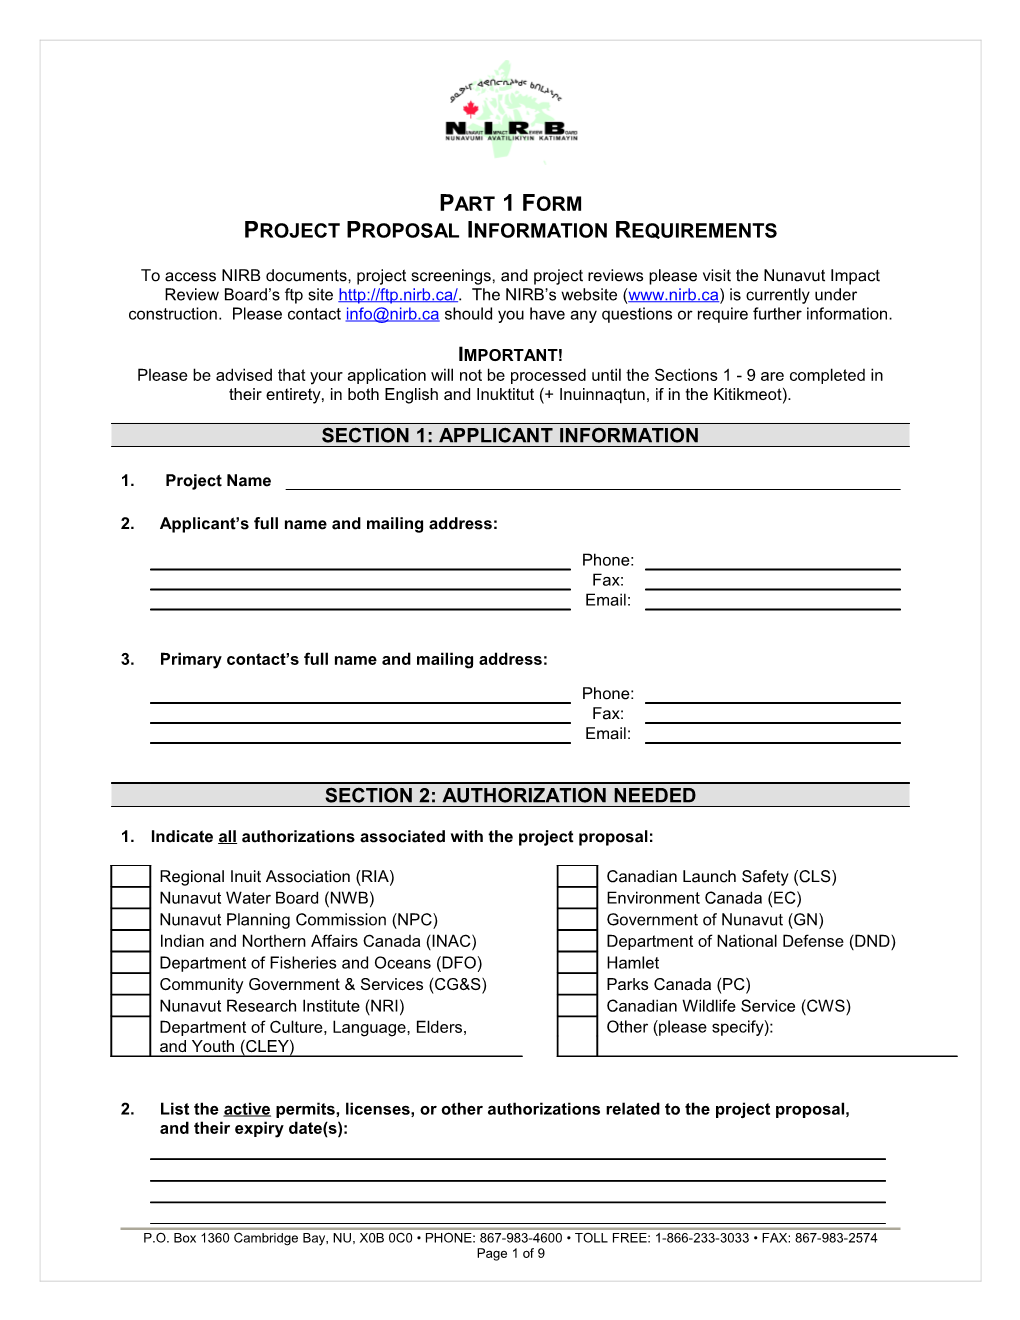 Project Proposal Information Requirements